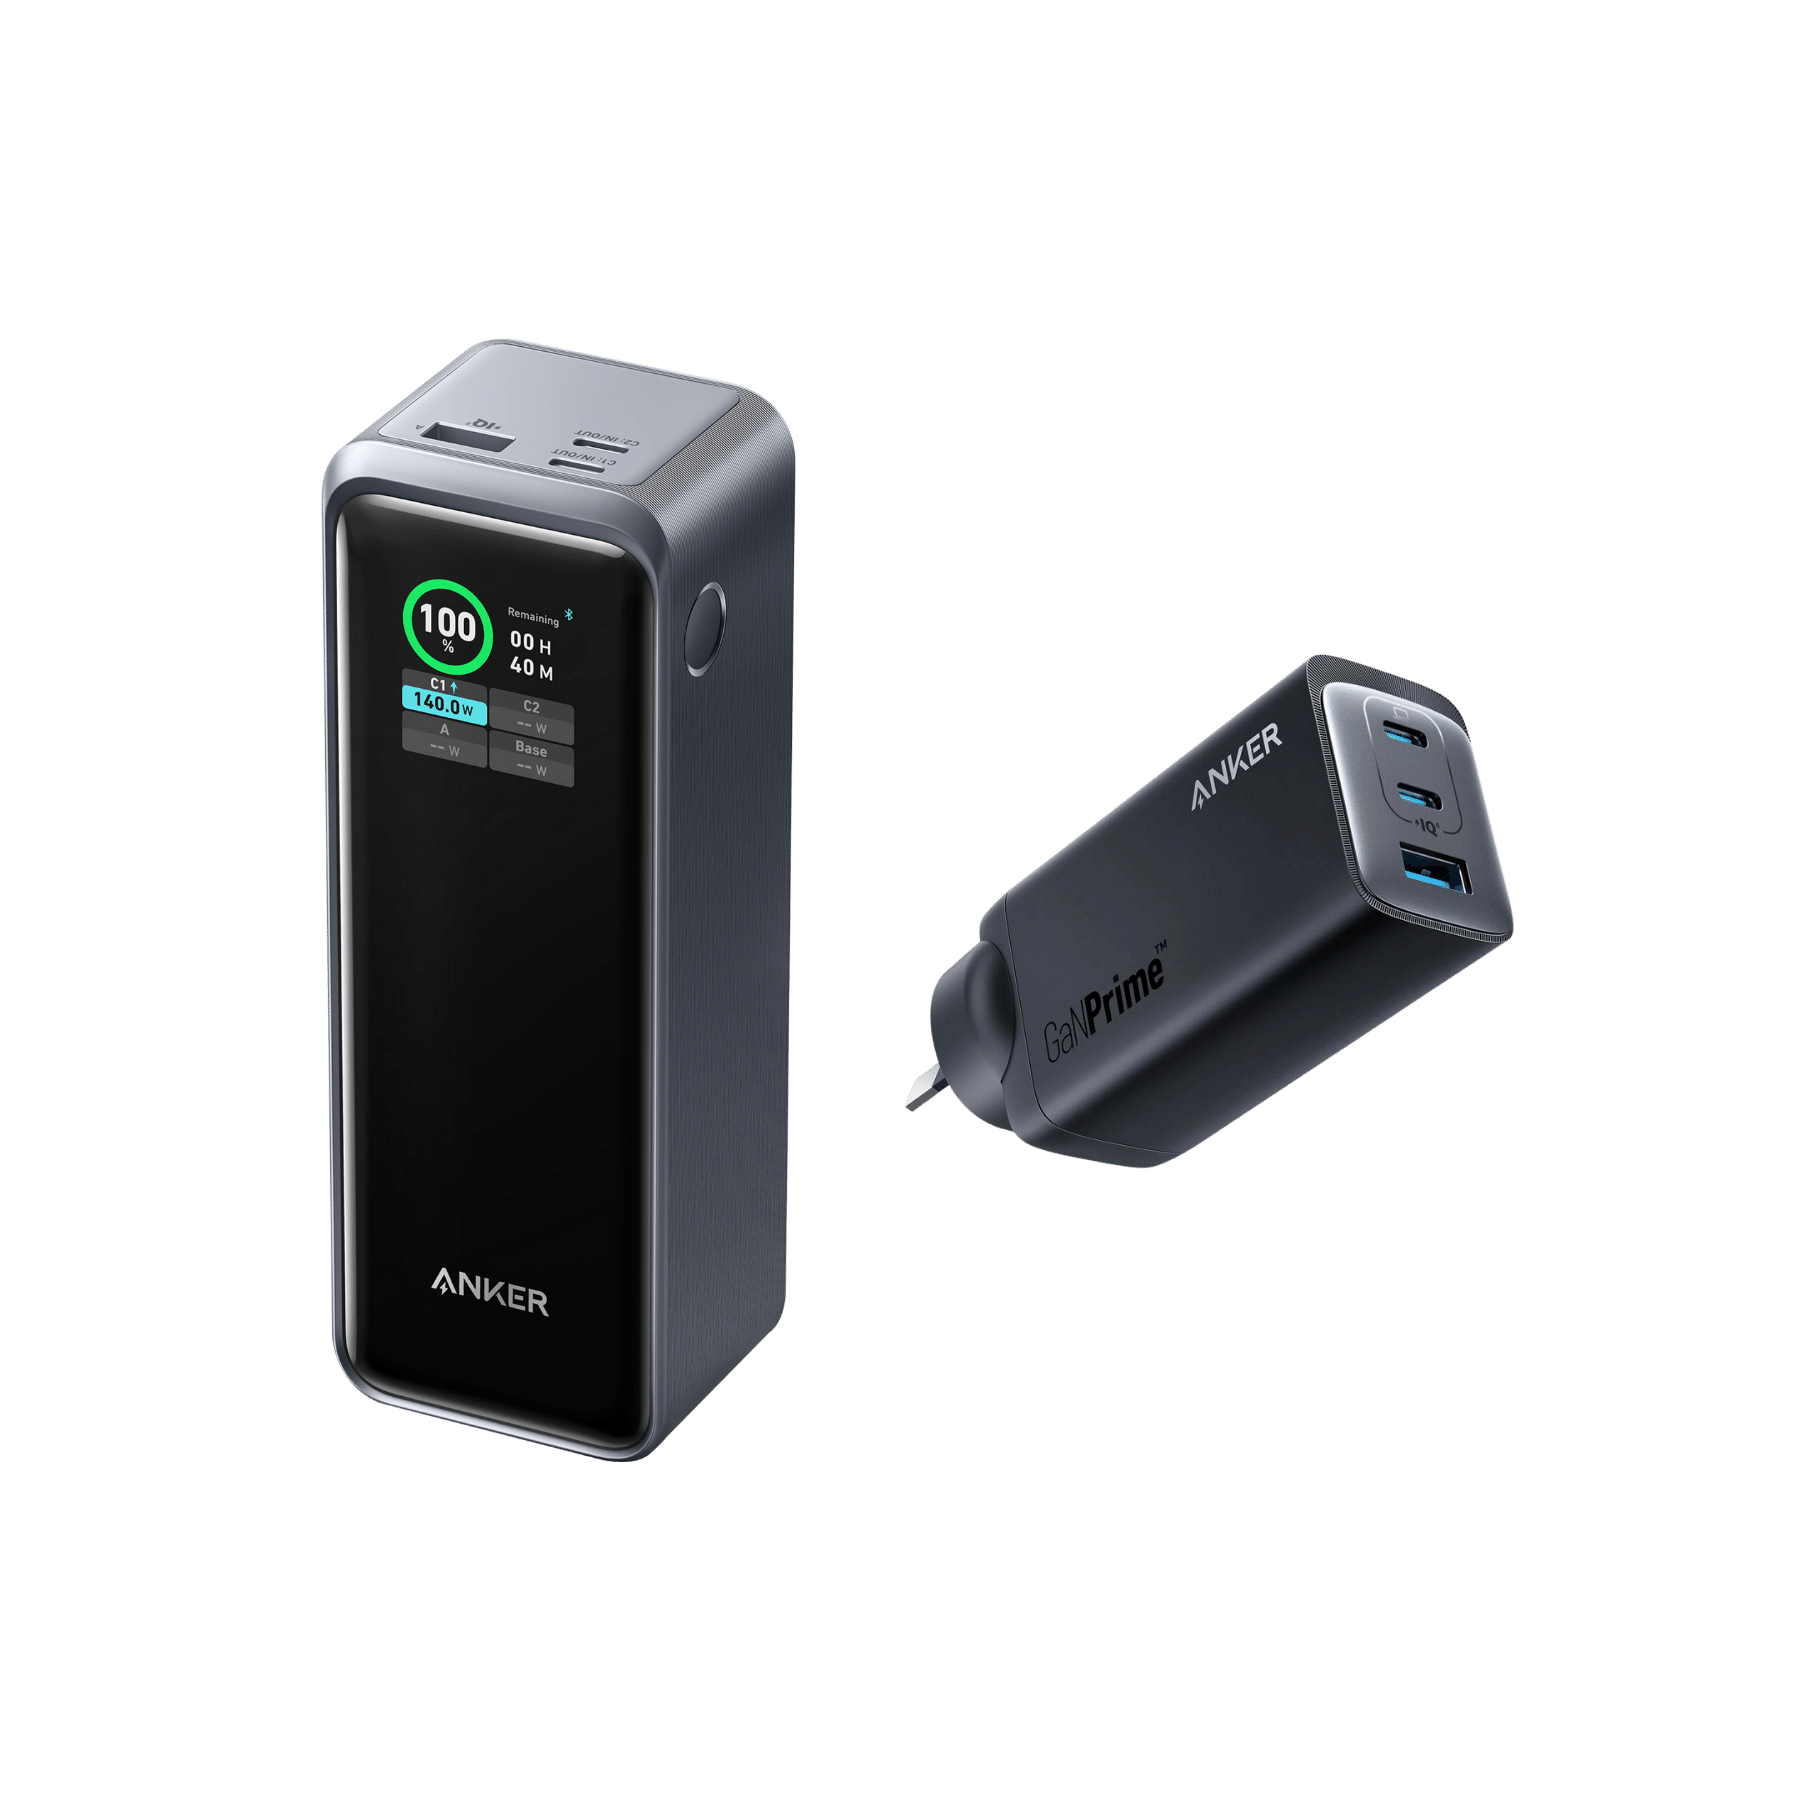 Anker Prime 27,650mAh Power Bank (250W)  and Anker 737 Charger (GaNPrime 120W)